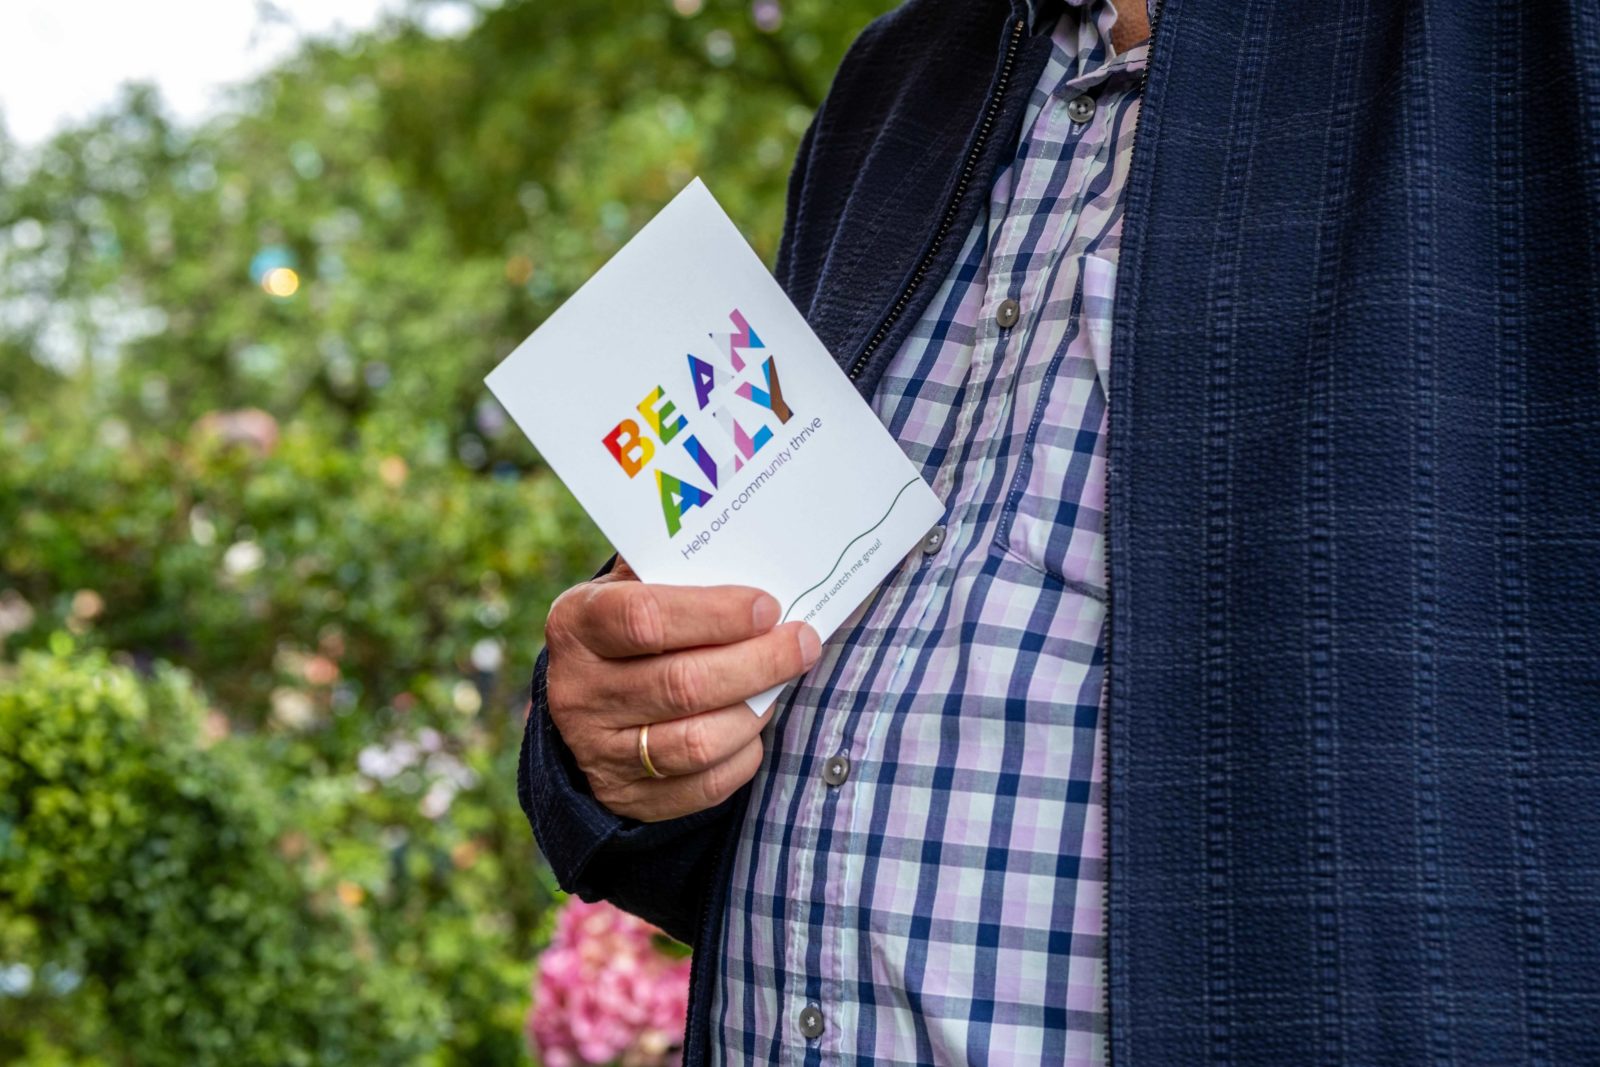 A man's torso is photographed, in his hand is a 'Be an Ally' postcard. He wears a checkered shirt and is in the park.